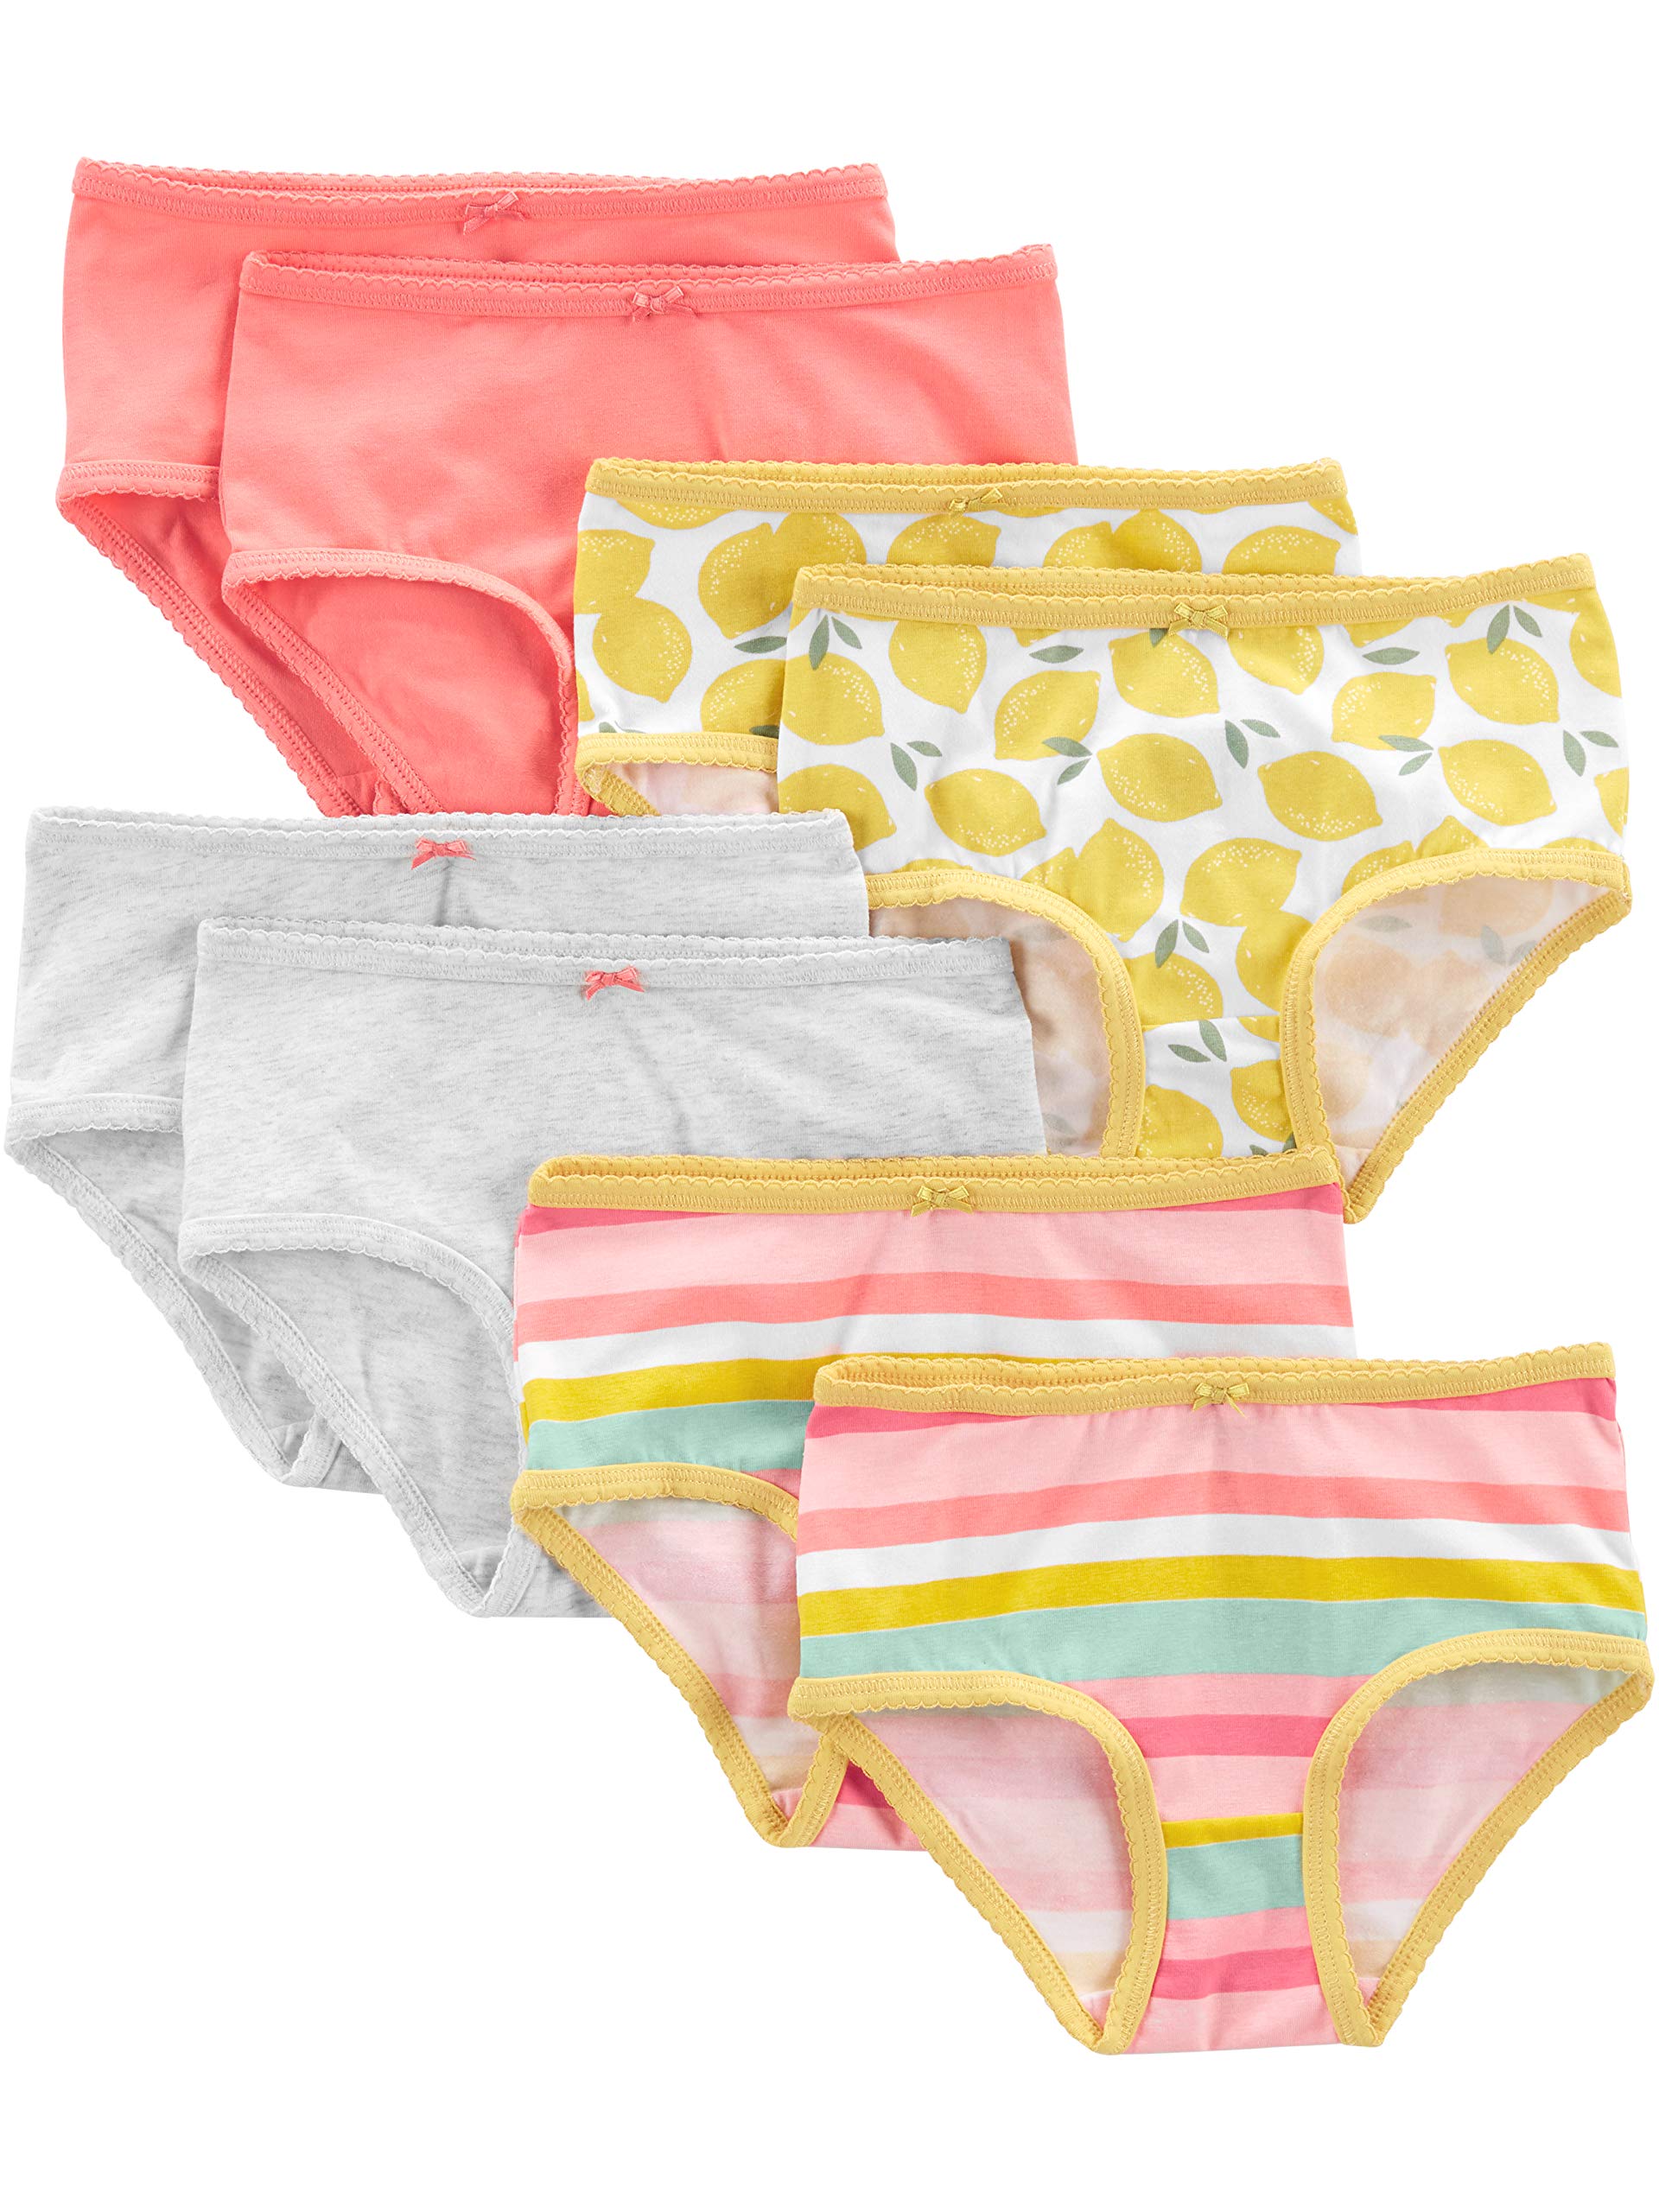 Simple Joys by Carter's Girls' Underwear, Pack of 8